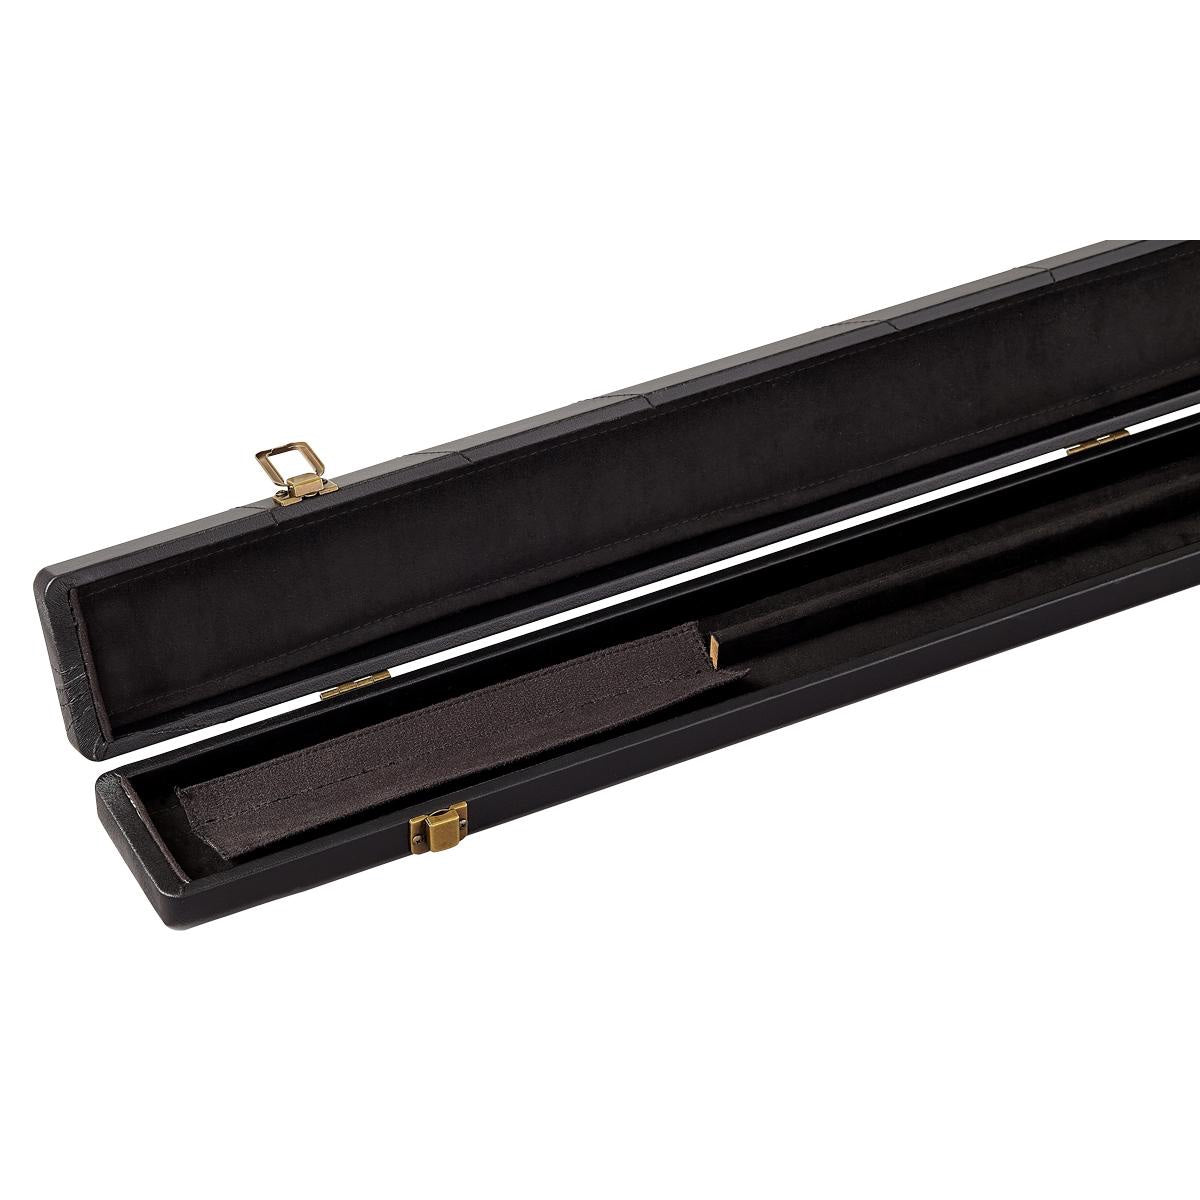 Powerglide Black Leather 3/4 Jointed Cue Case